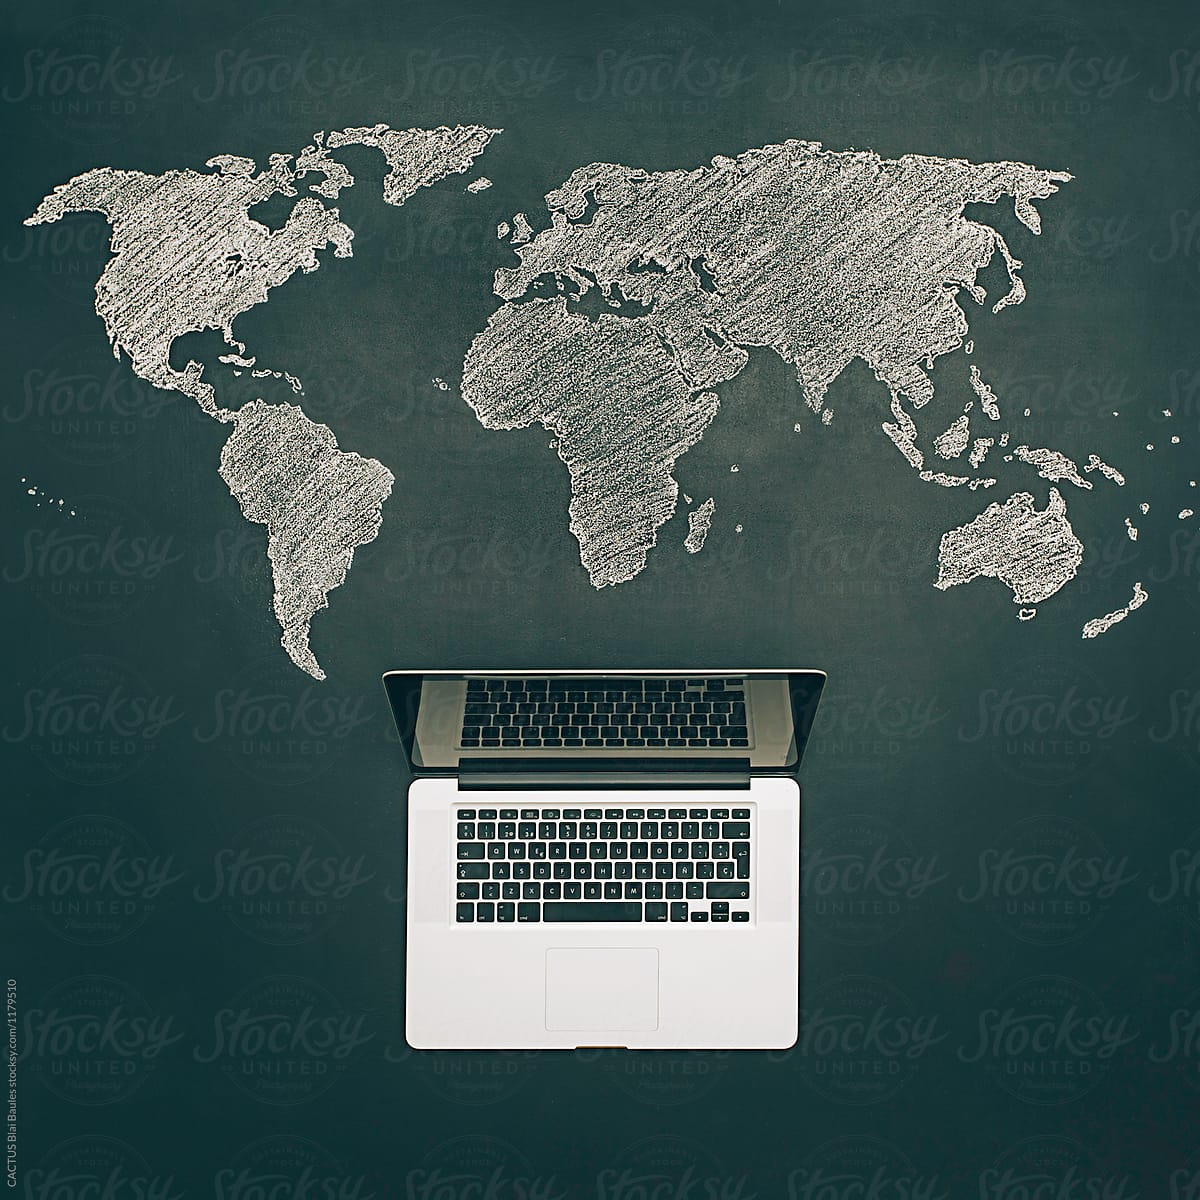 World map on chalkboard with a notebook computer